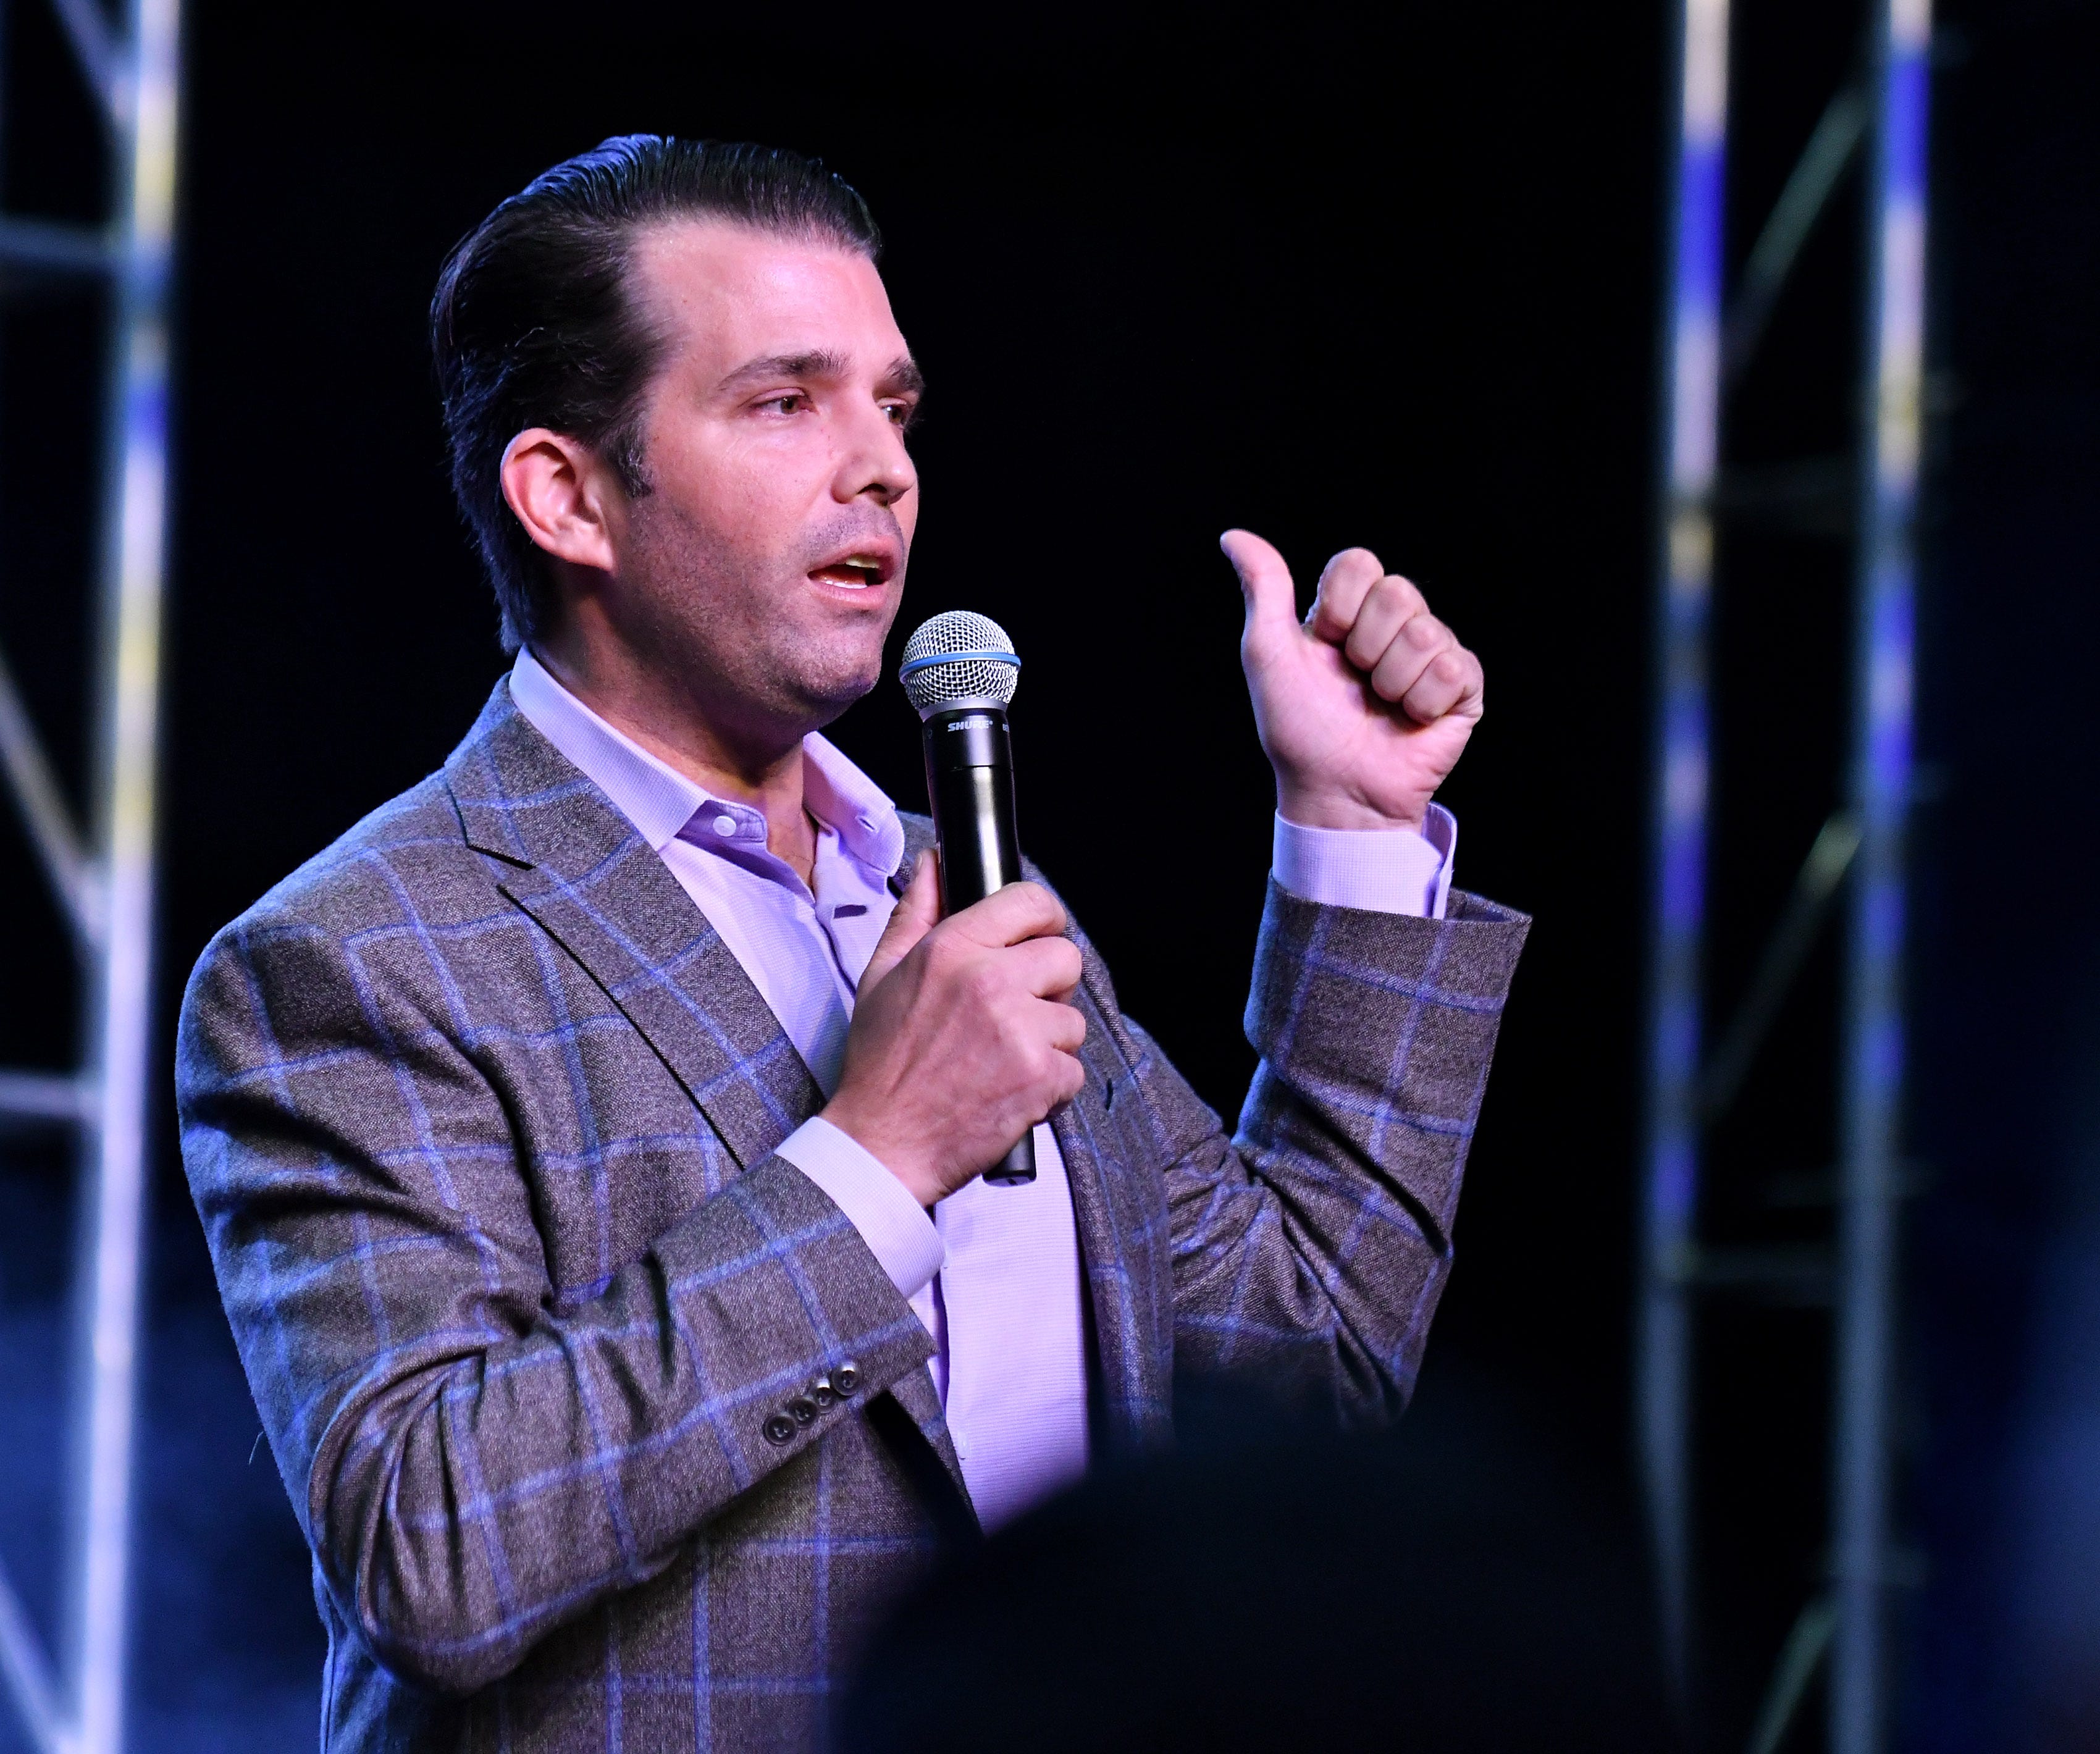 Donald Trump, Jr. speaks during the rally.